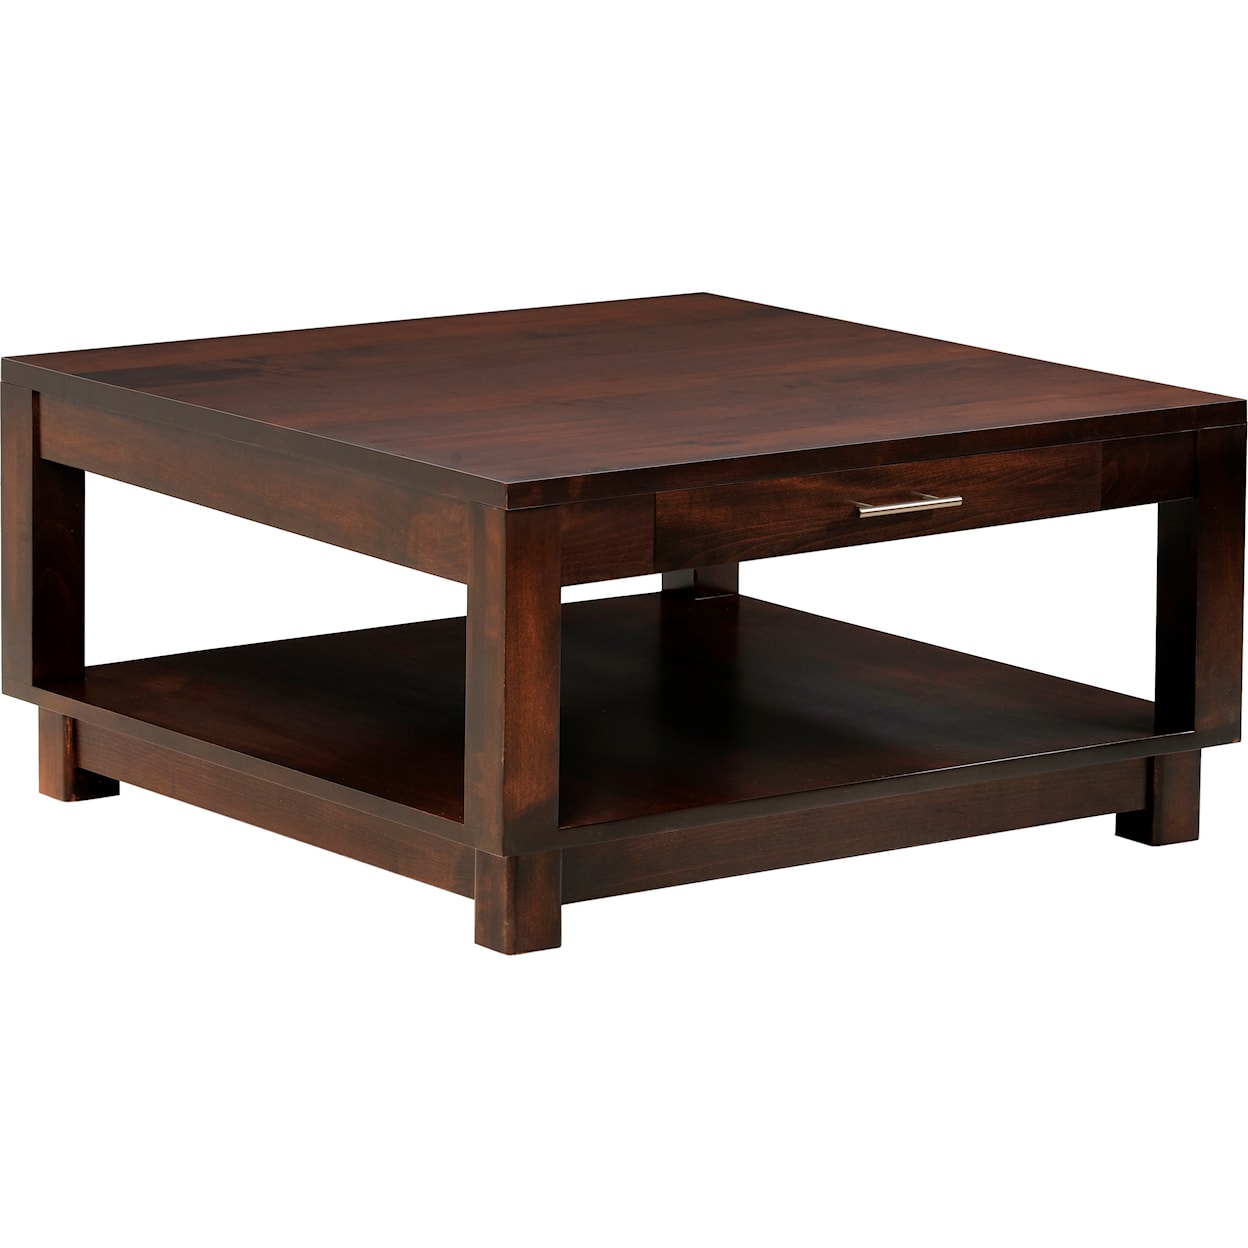 Y & T Woodcraft Urban Square Coffee Table